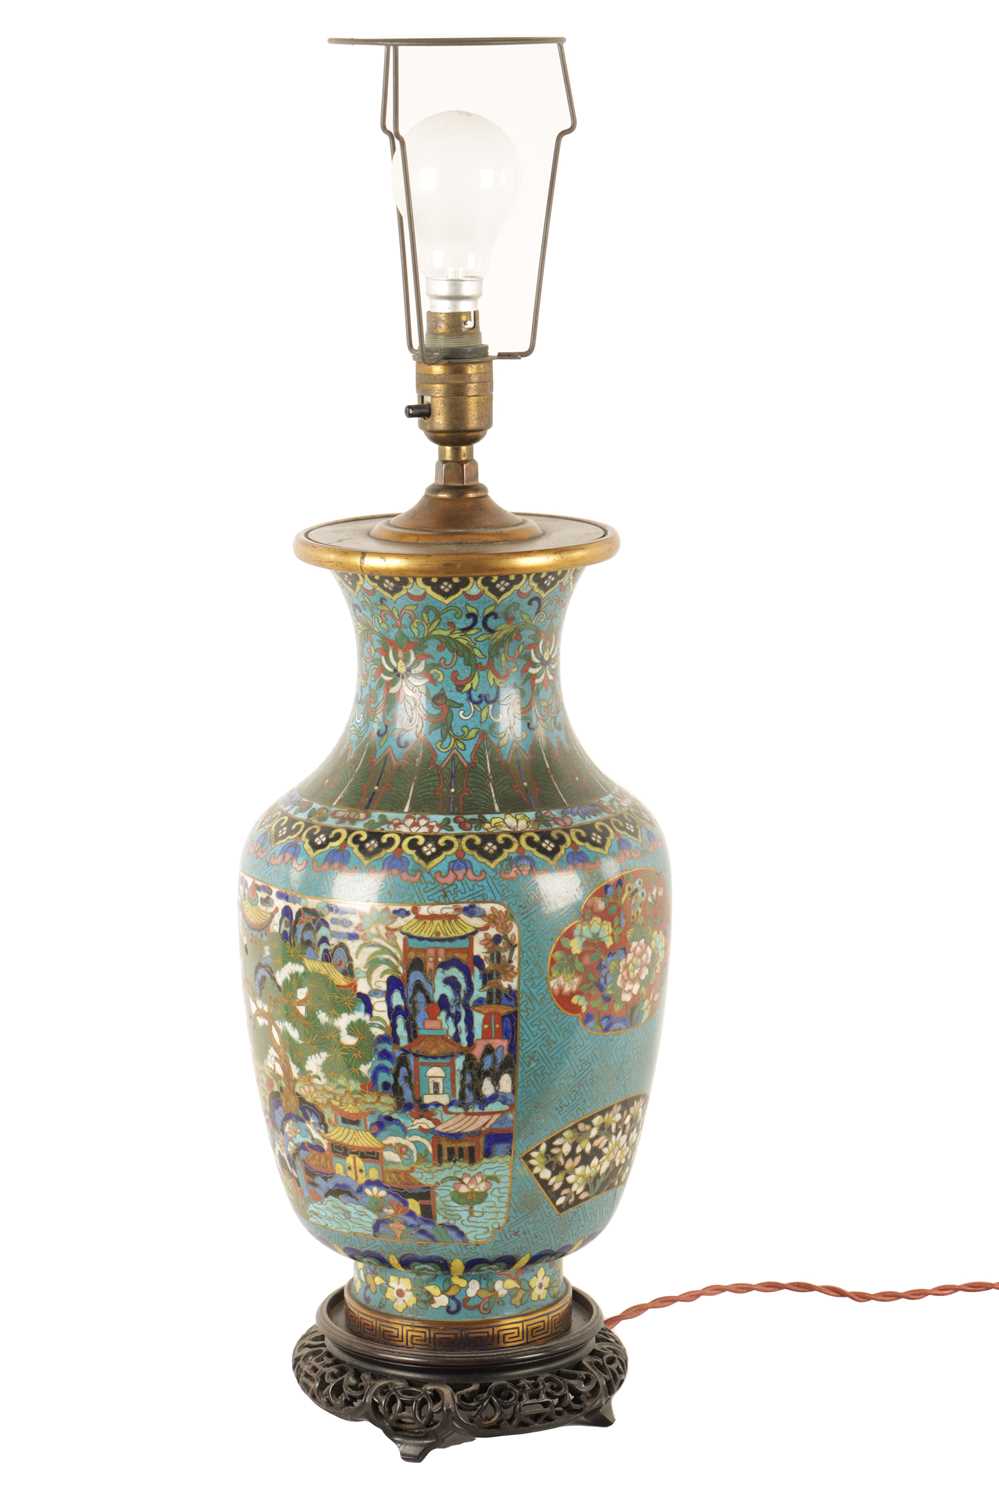 A LATE 19TH/EARLY 20TH CENTURY CENTURY CHINESE CLOISONNE VASE LAMP